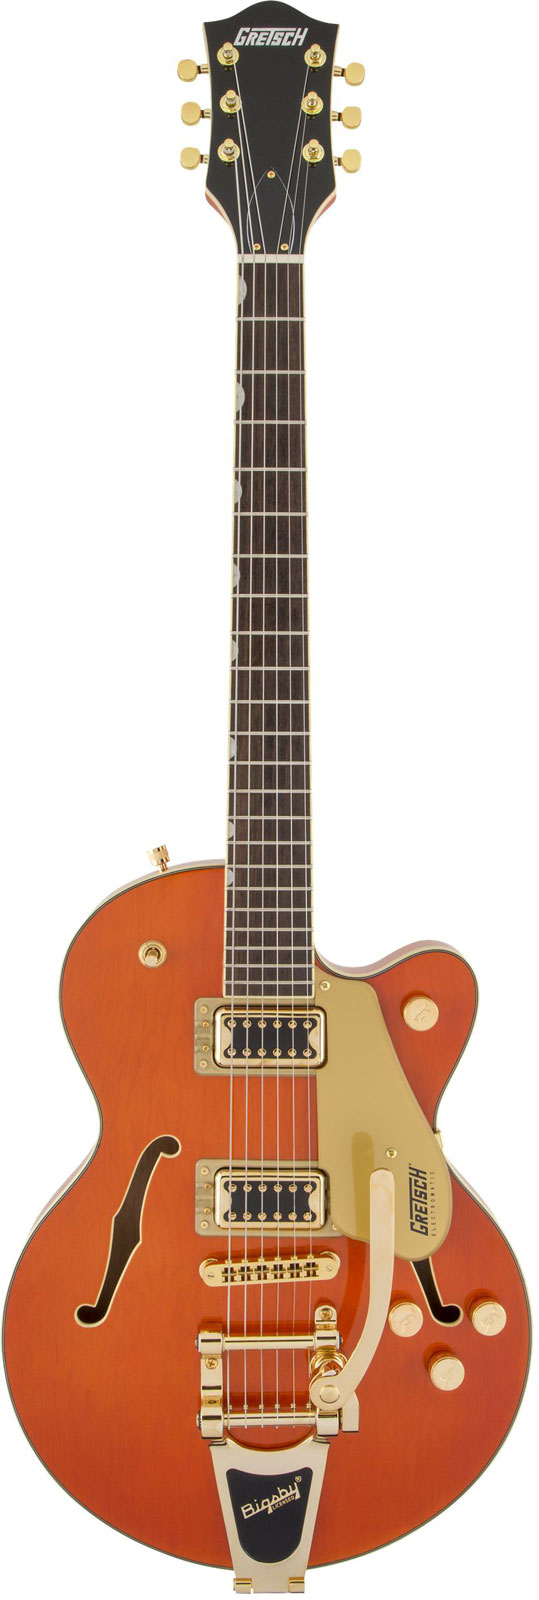 GRETSCH GUITARS G5655TG ELECTROMATIC CENTER BLOCK JR. SINGLE-CUT WITH BIGSBY AND GOLD HARDWARE LRL, ORANGE STAIN